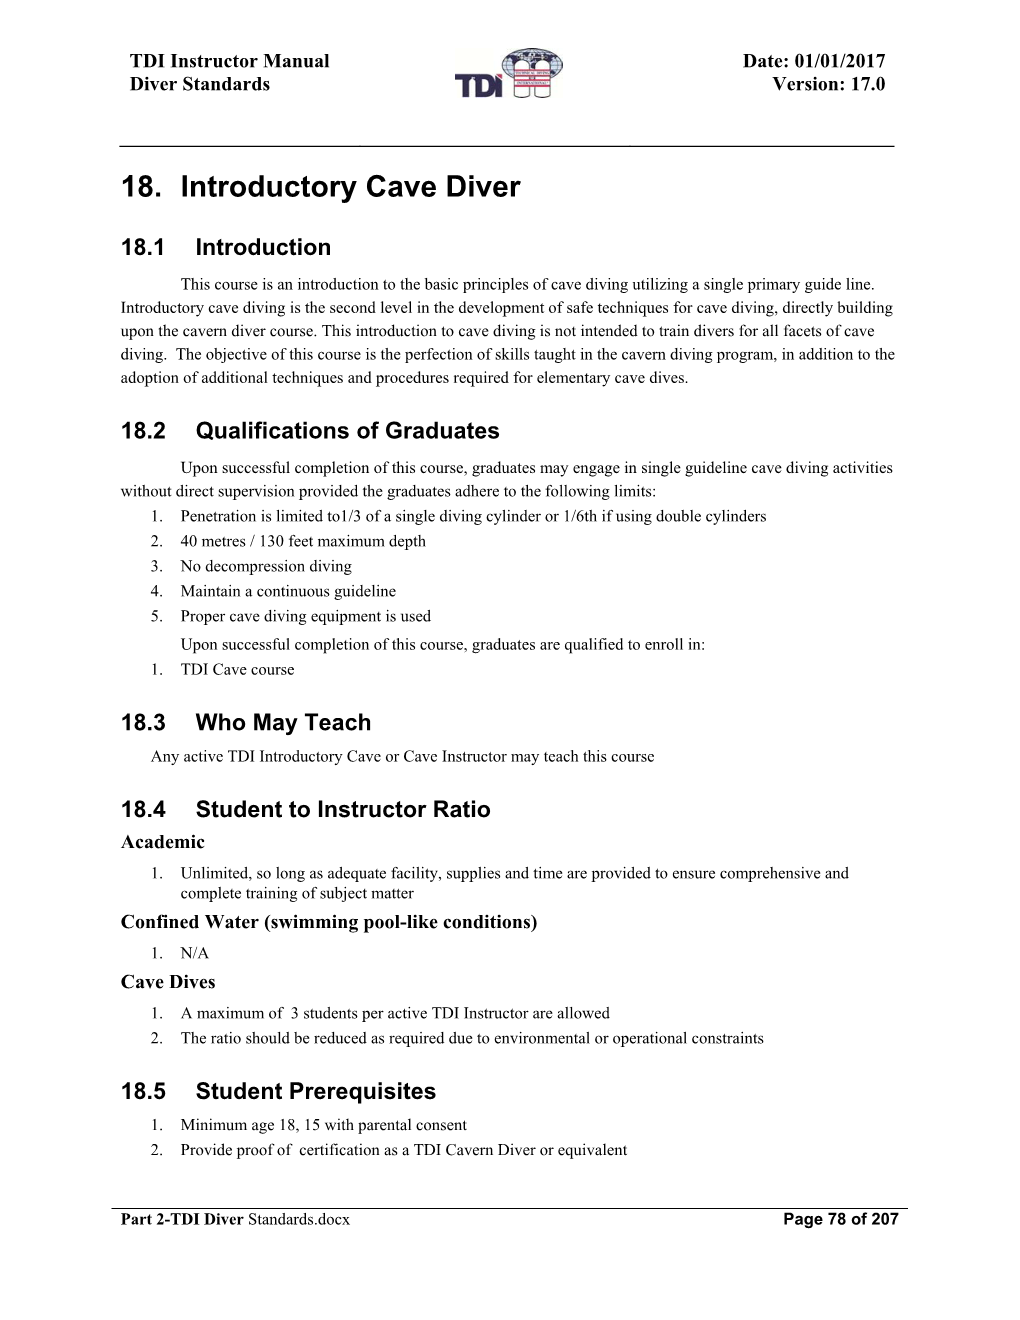 18. Introductory Cave Diver